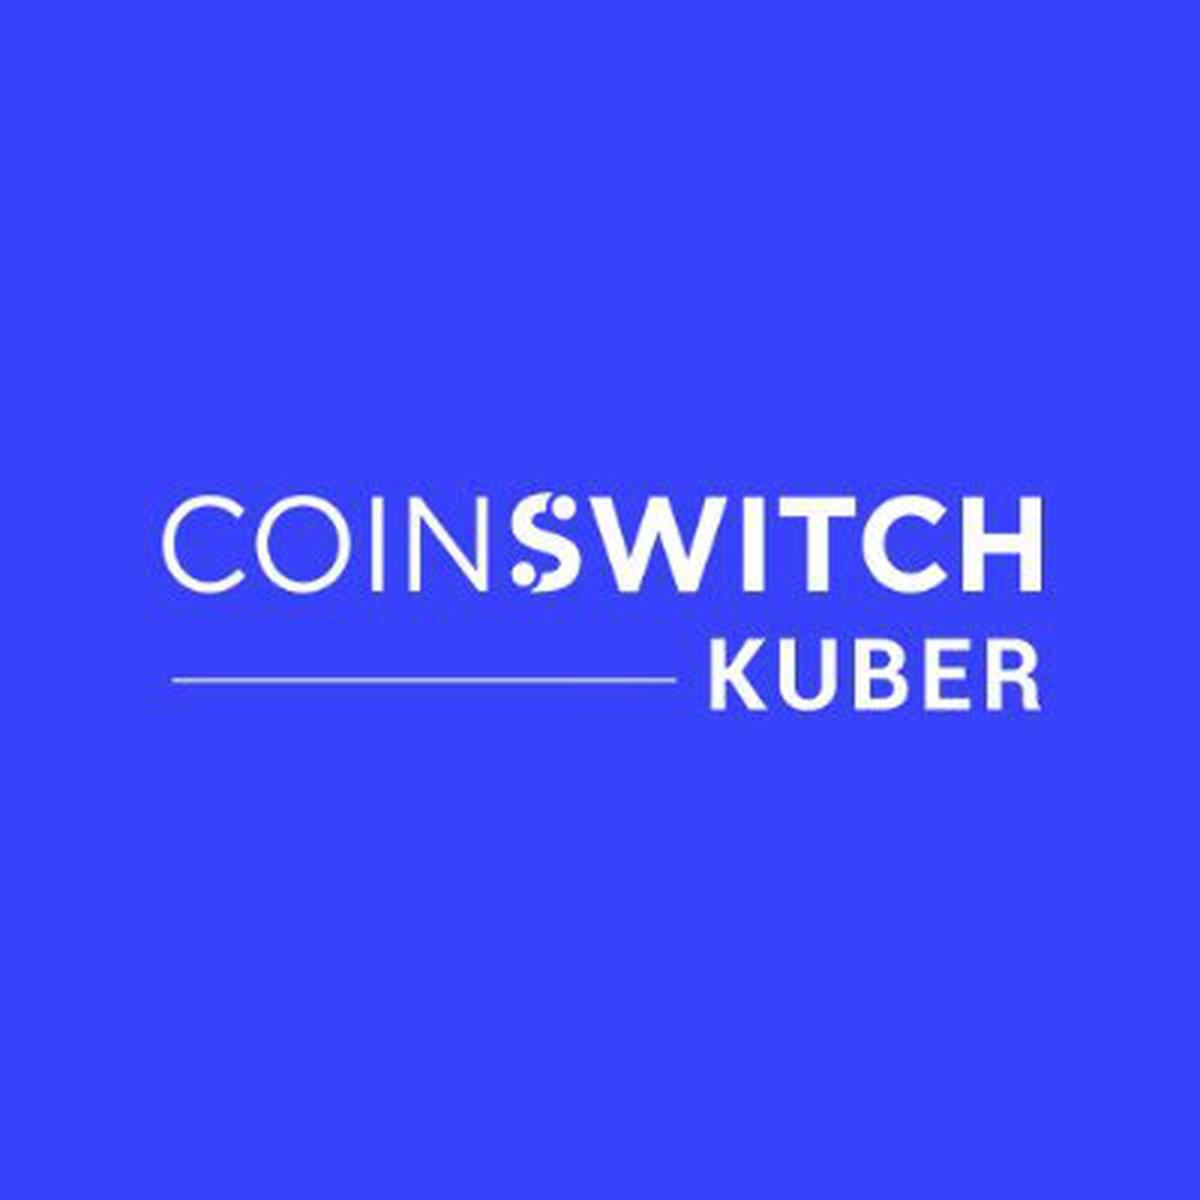 Coin Switch Kuber